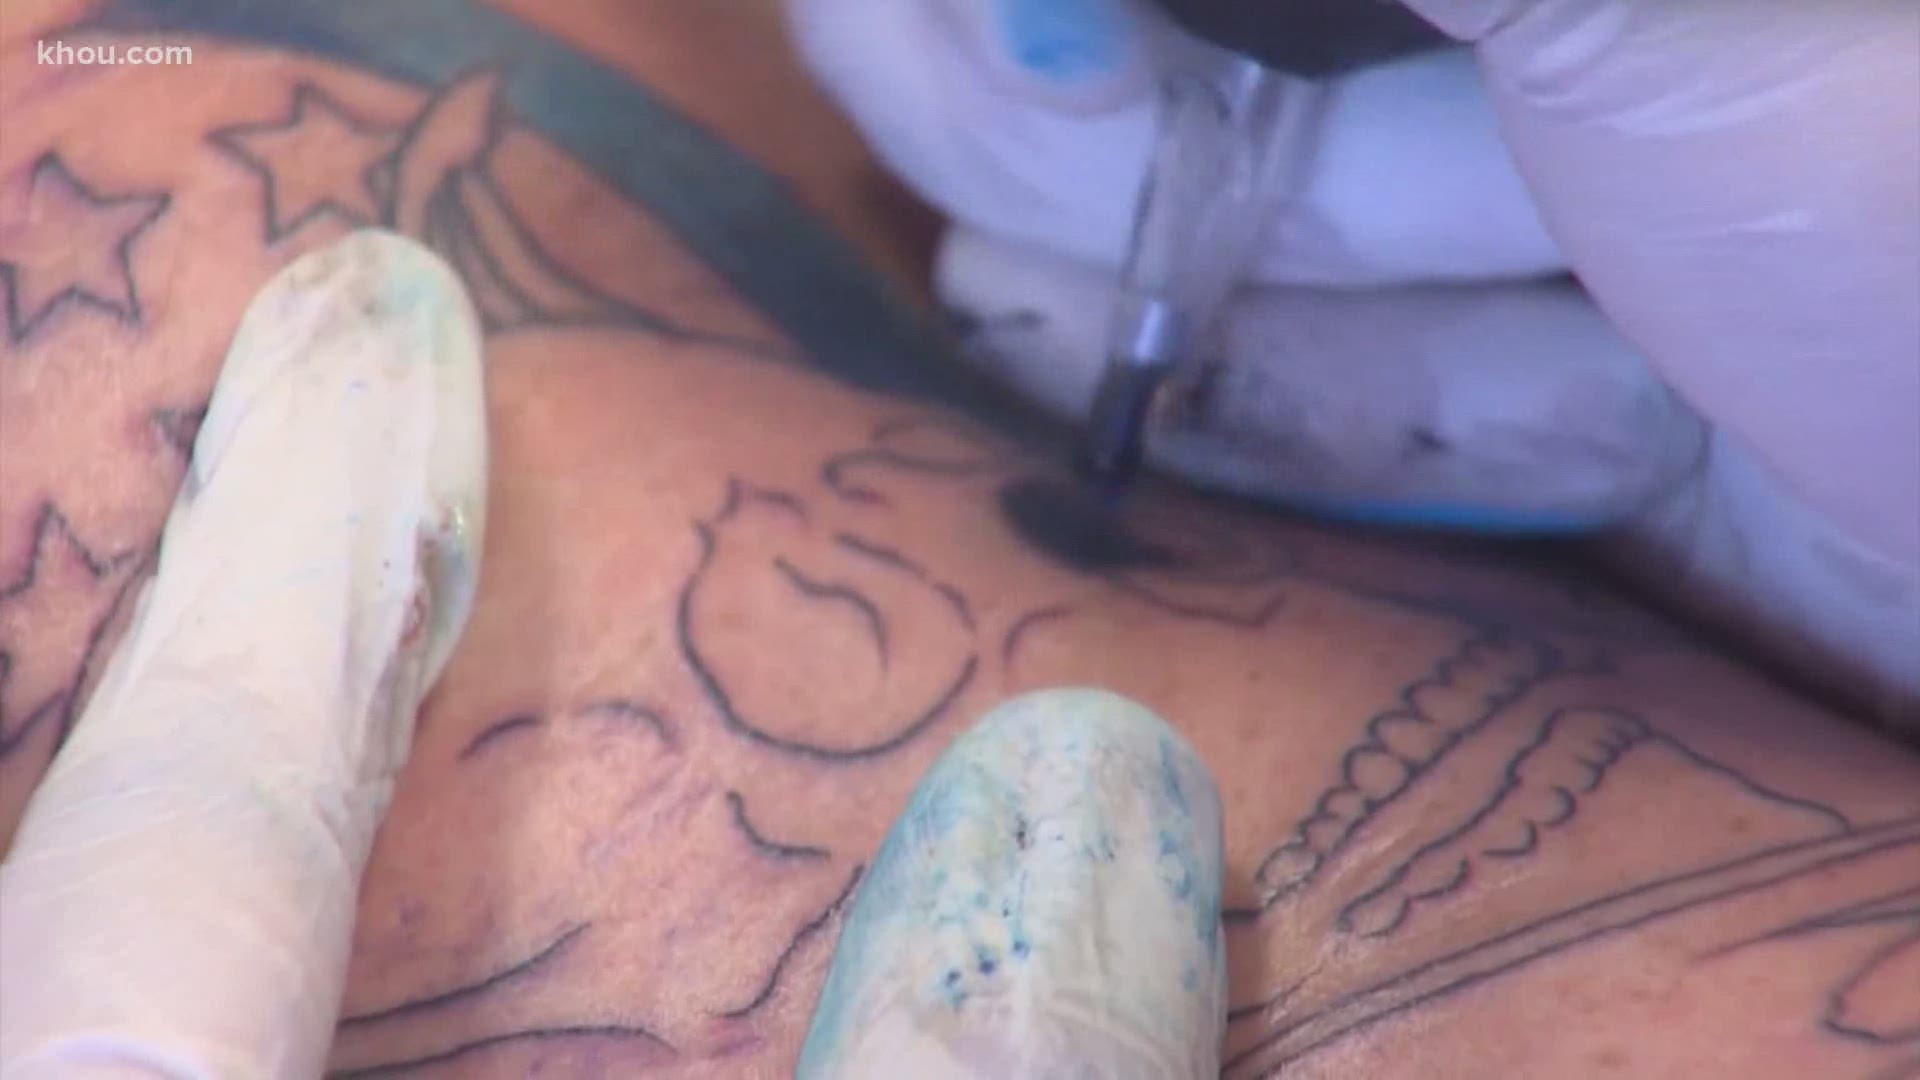 Tattoo temptation? Think before you ink